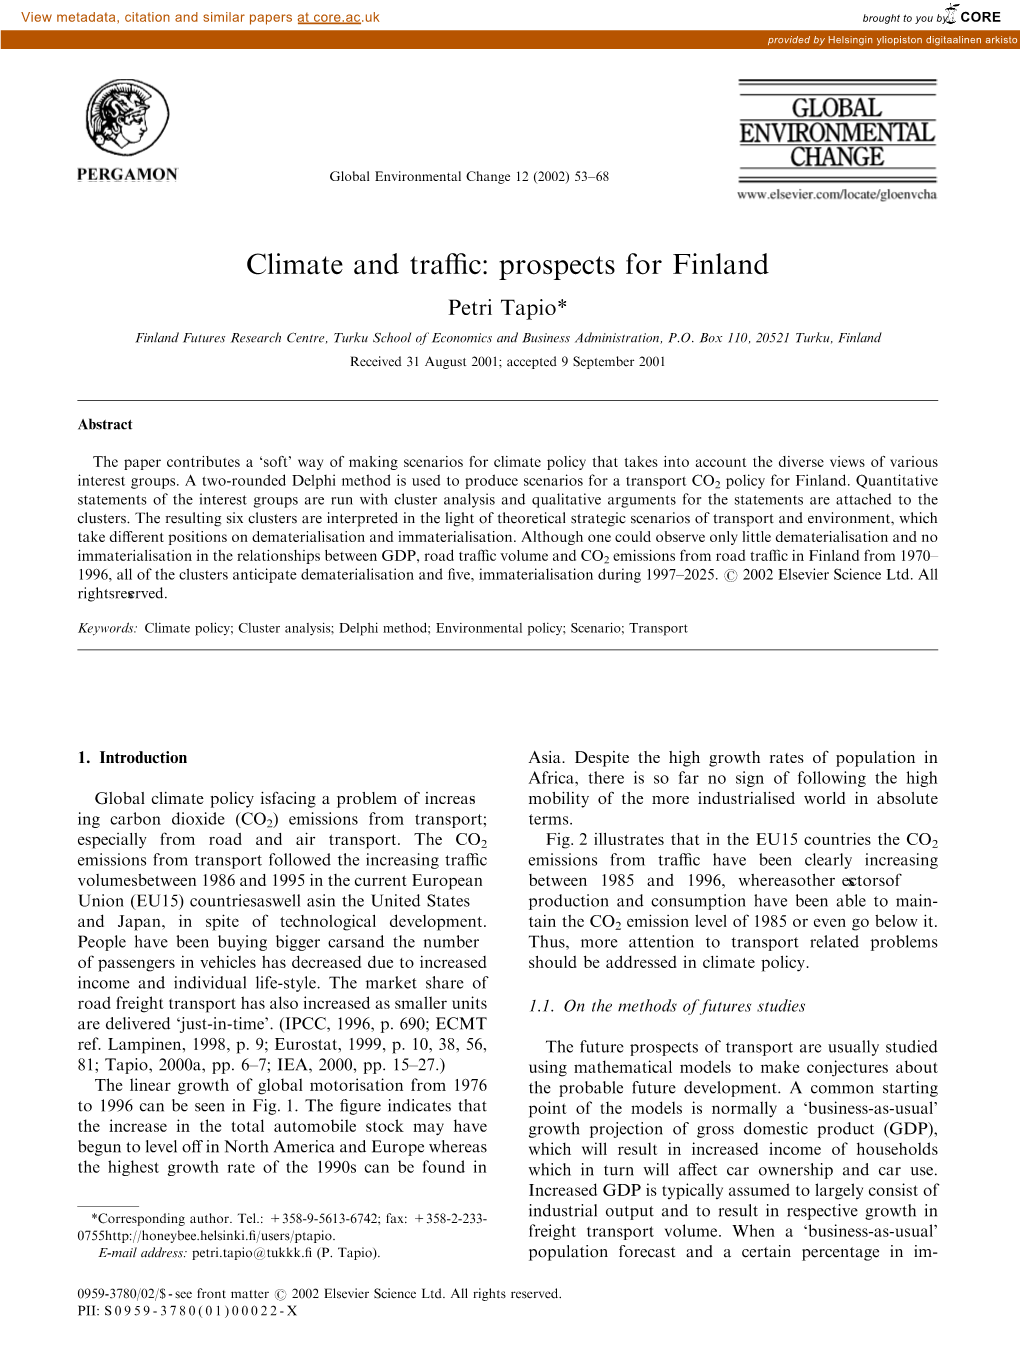 Climate and Traffic: Prospects for Finland